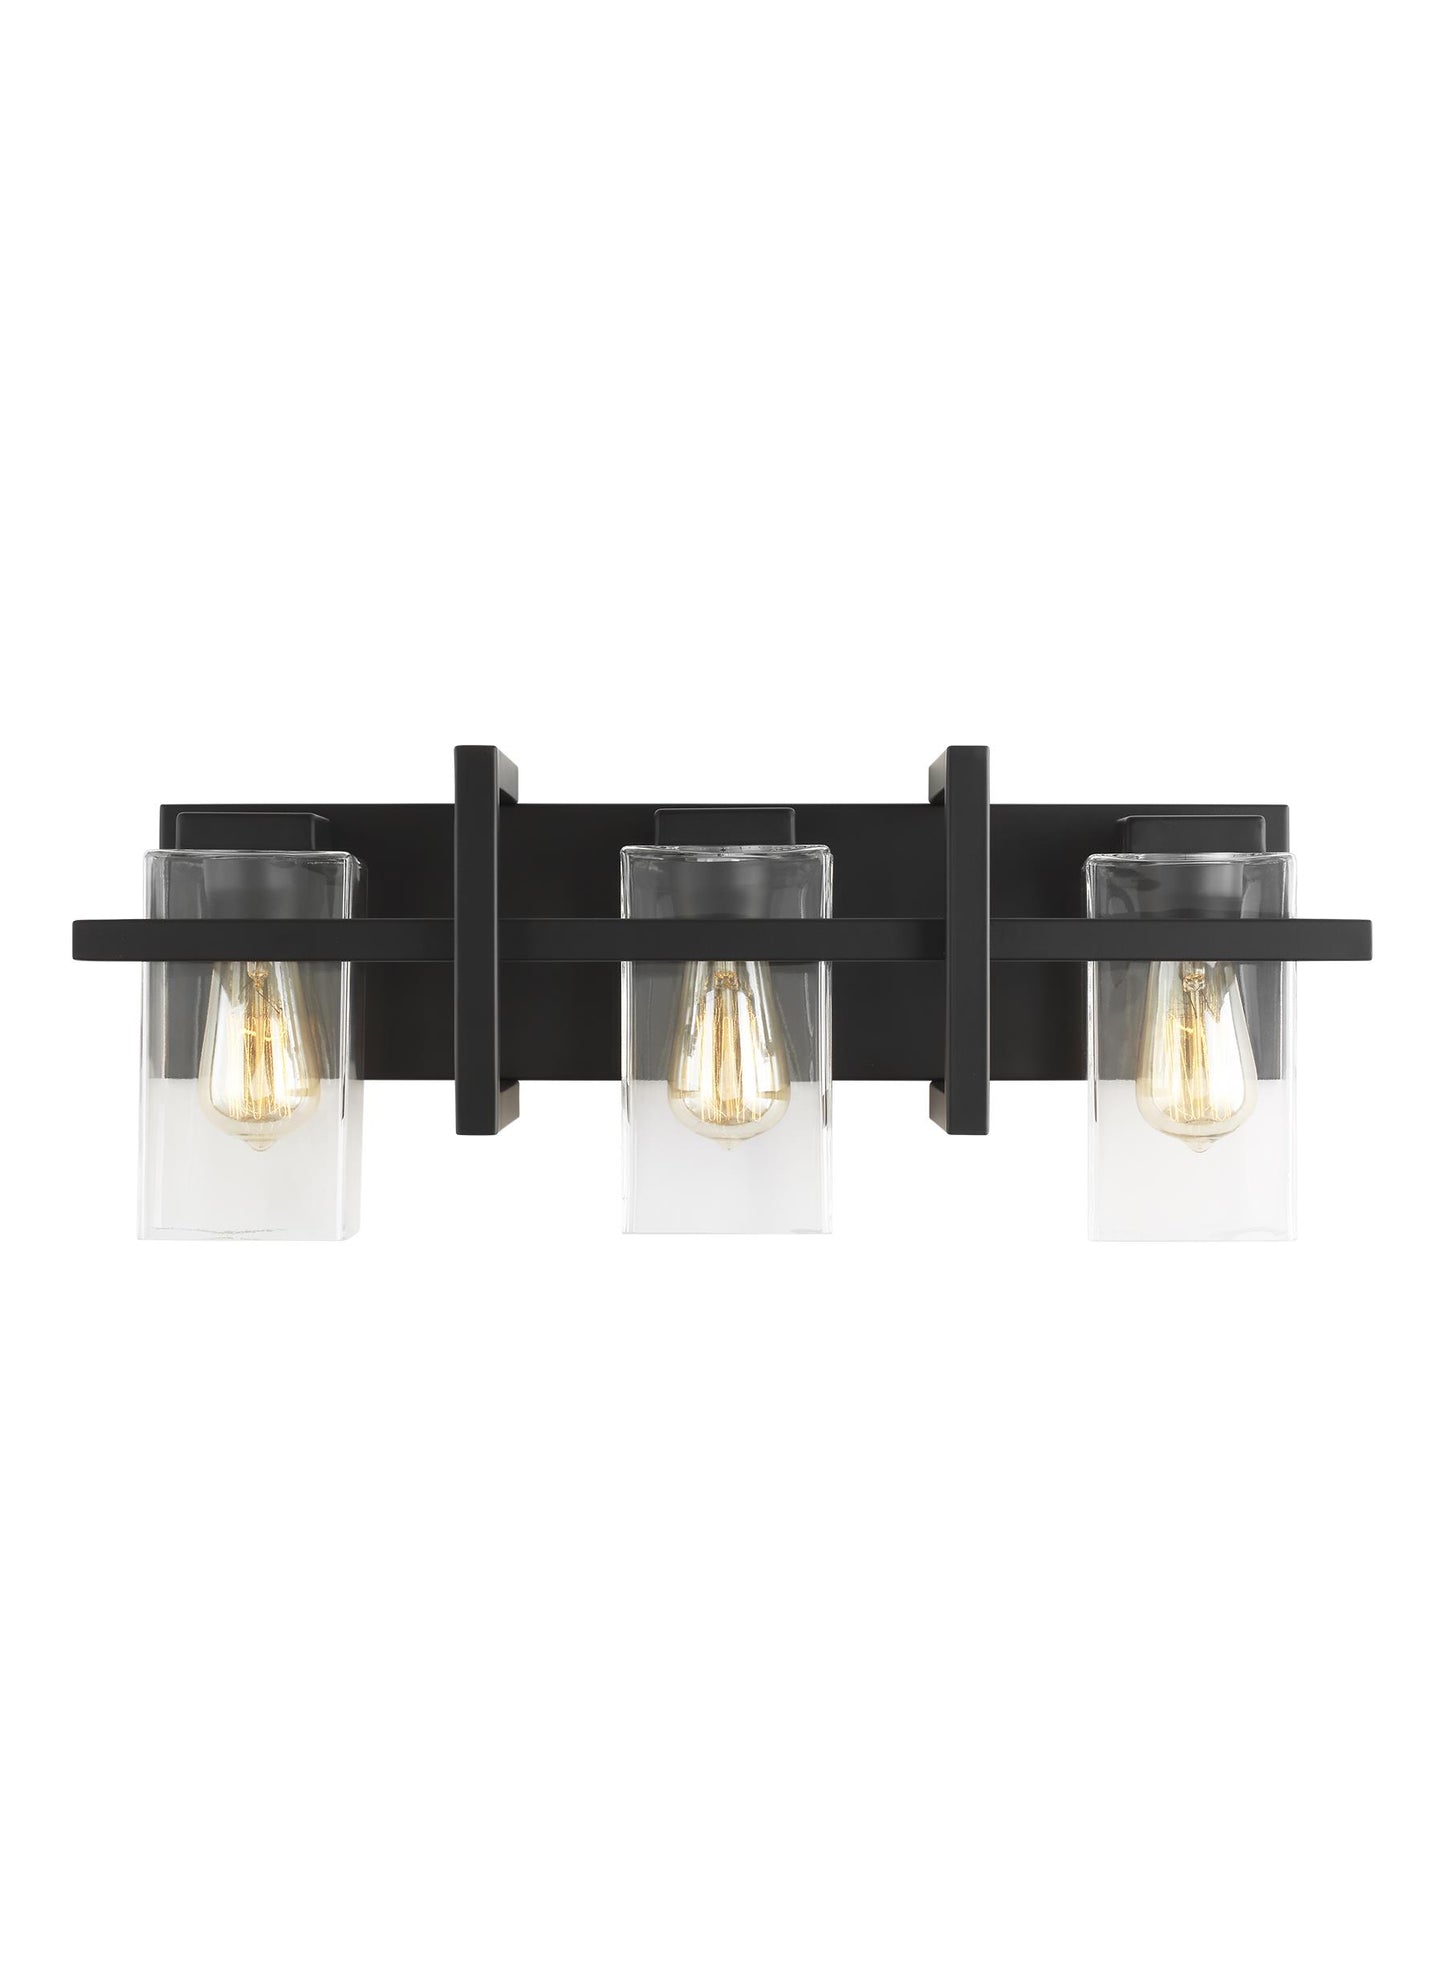 Mitte transitional 3-light indoor dimmable bath vanity wall sconce in midnight black finish with clear glass shades